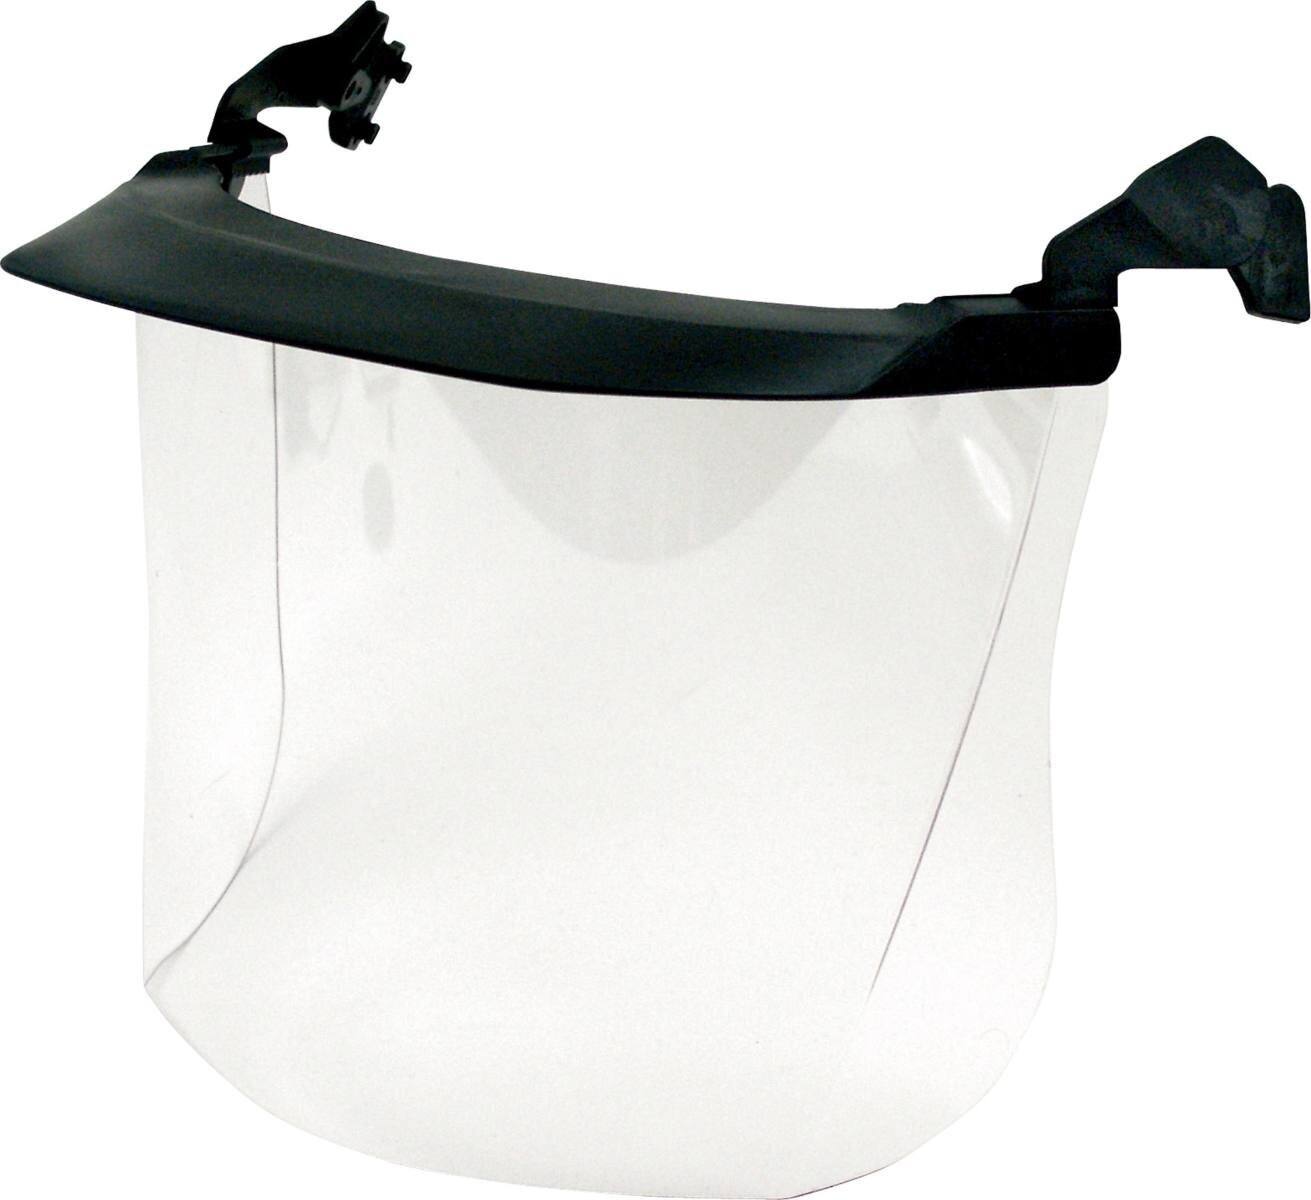 3M V4H clear visor polycarbonate with sun shield extremely impact-resistant thickness: 1.2mm, weight: 120g (including helmet mount)